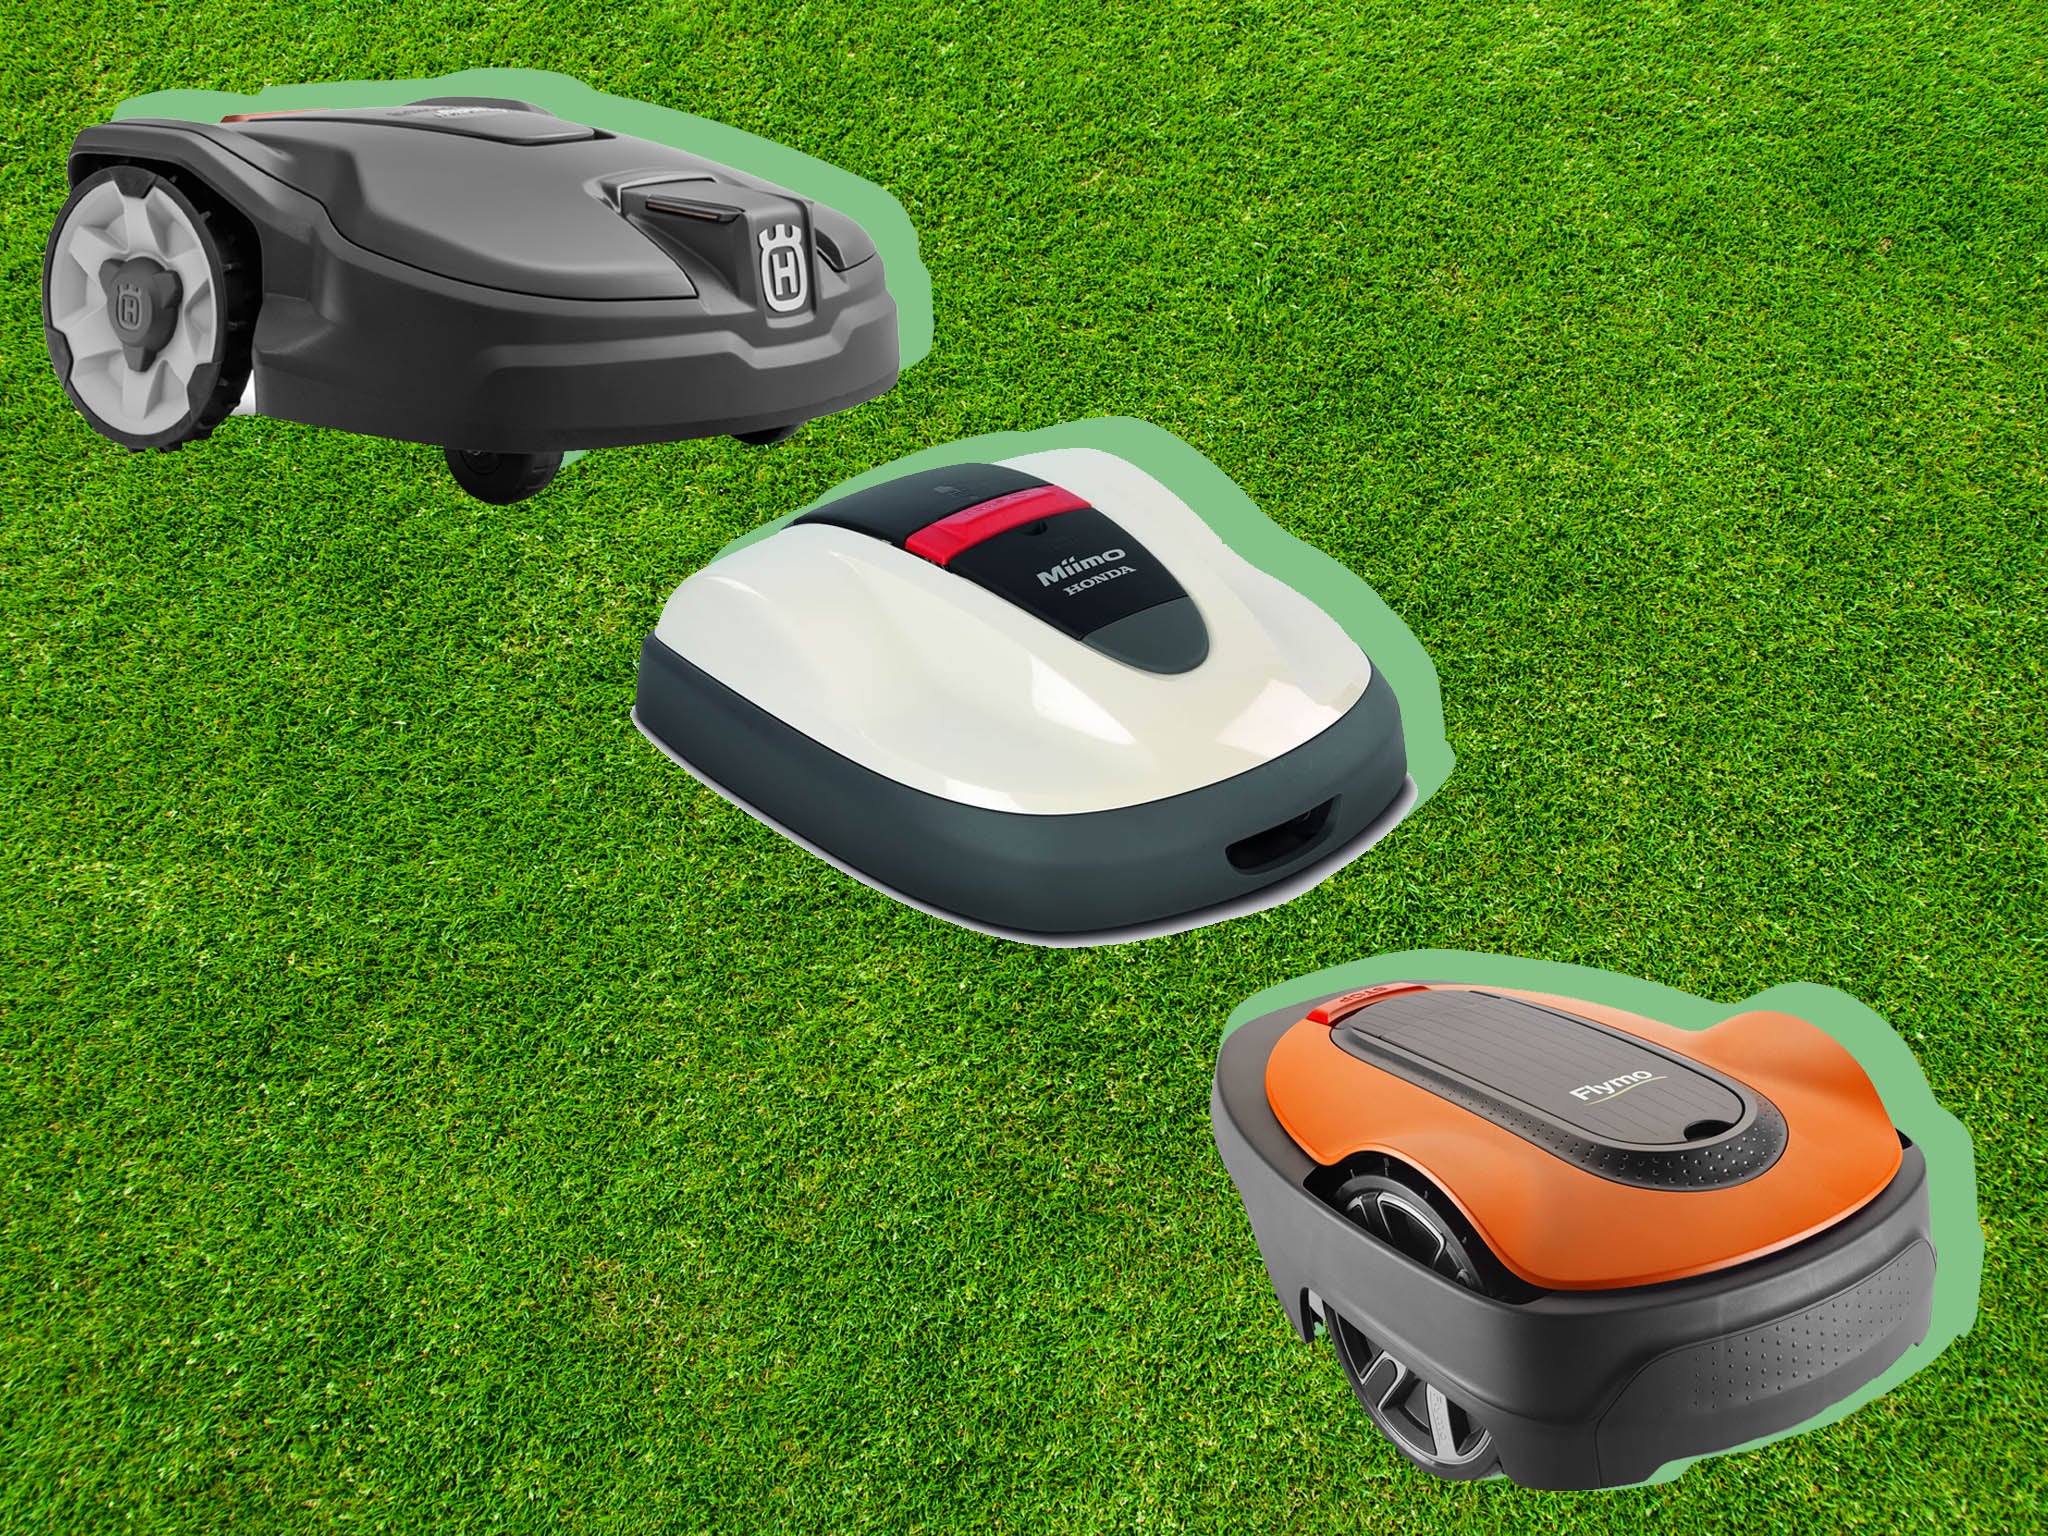 Lawn Mowing Simulator Codes 2020 Wiki